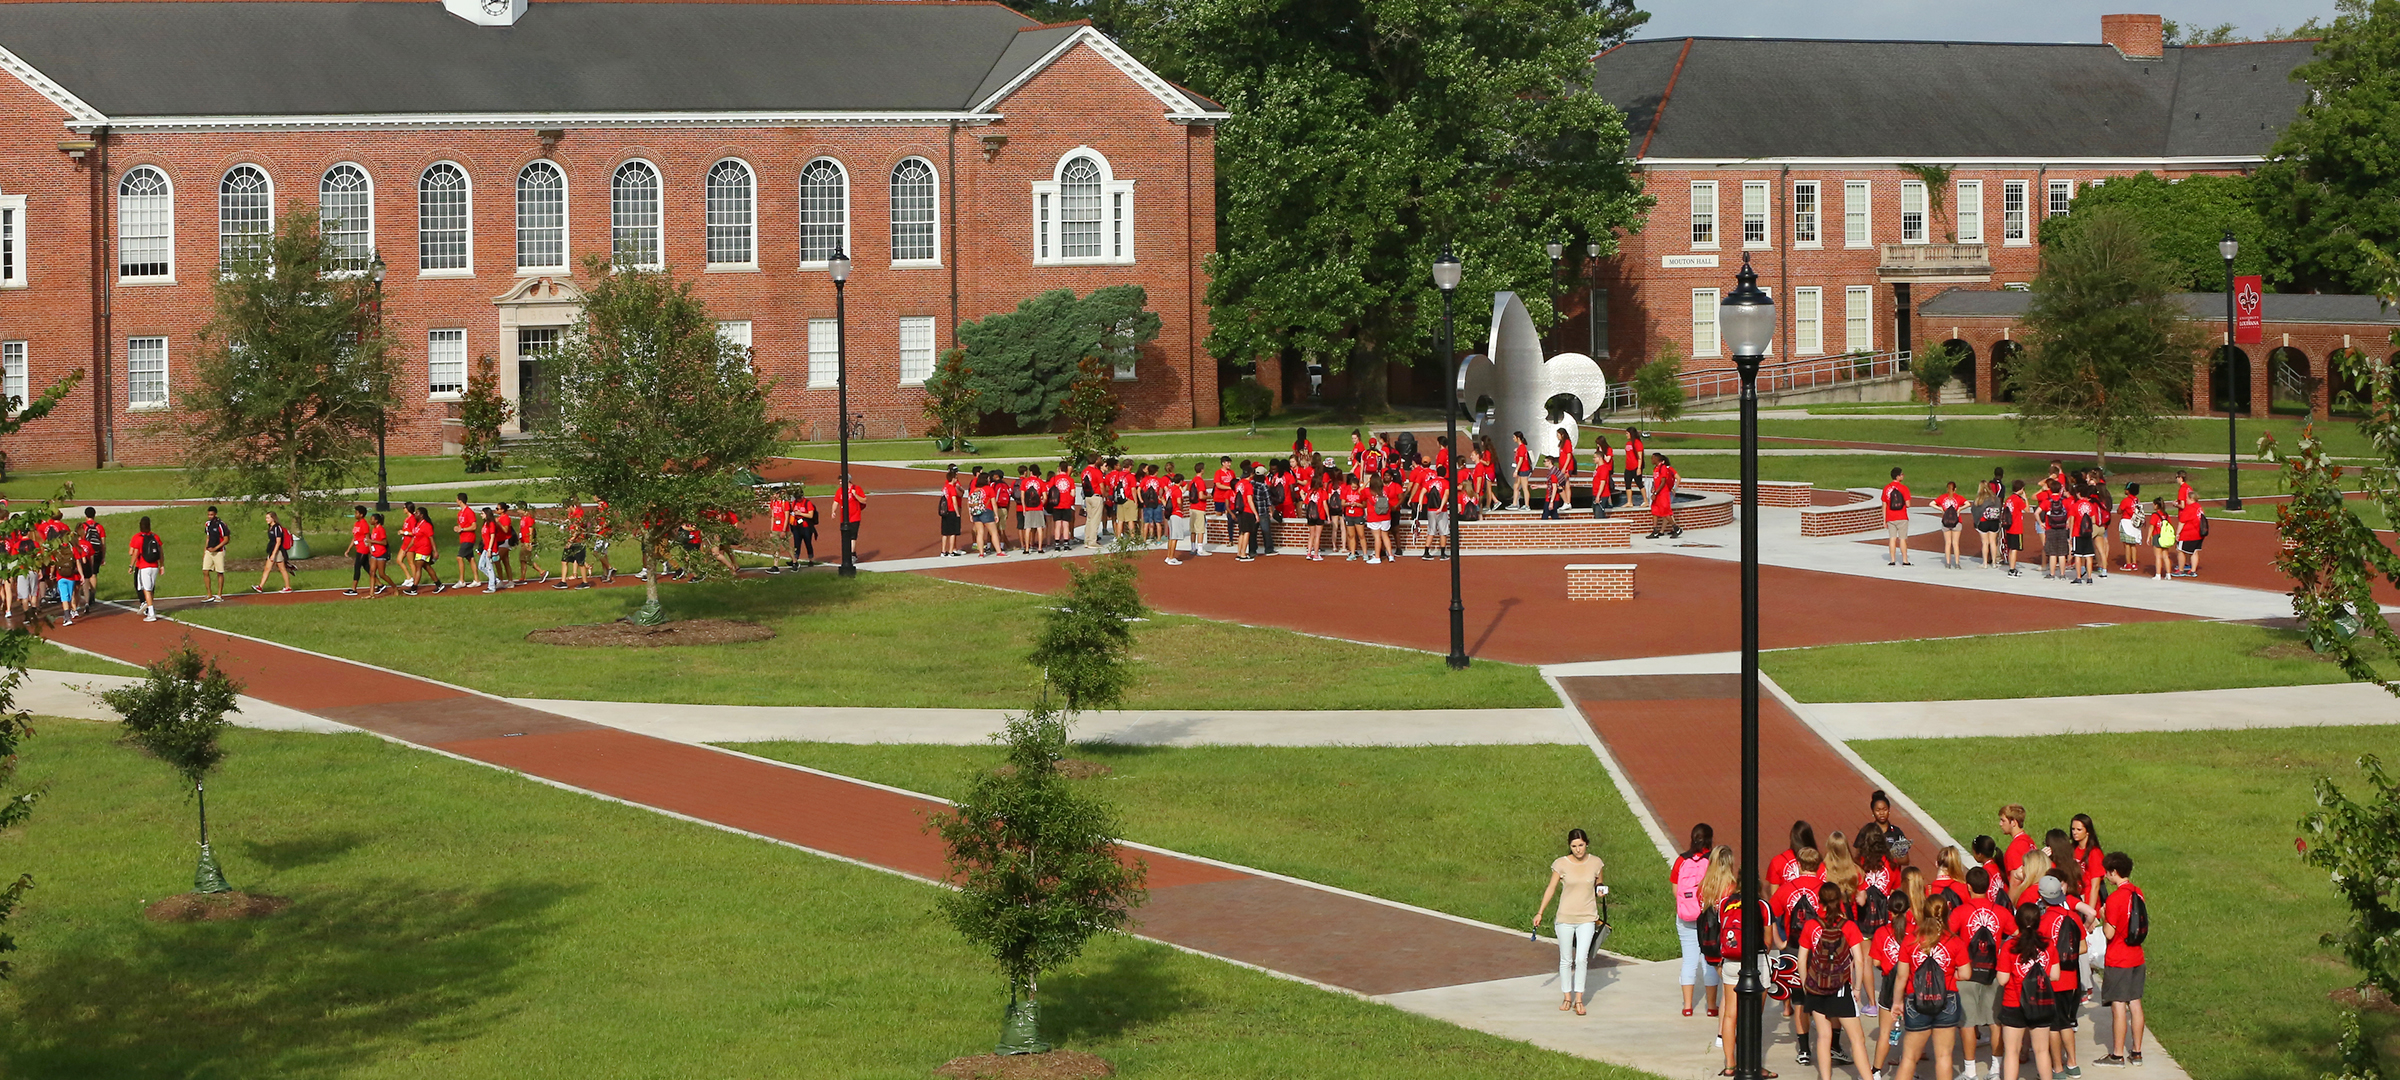 Students gather in the 鶹ҹ quad during a tour